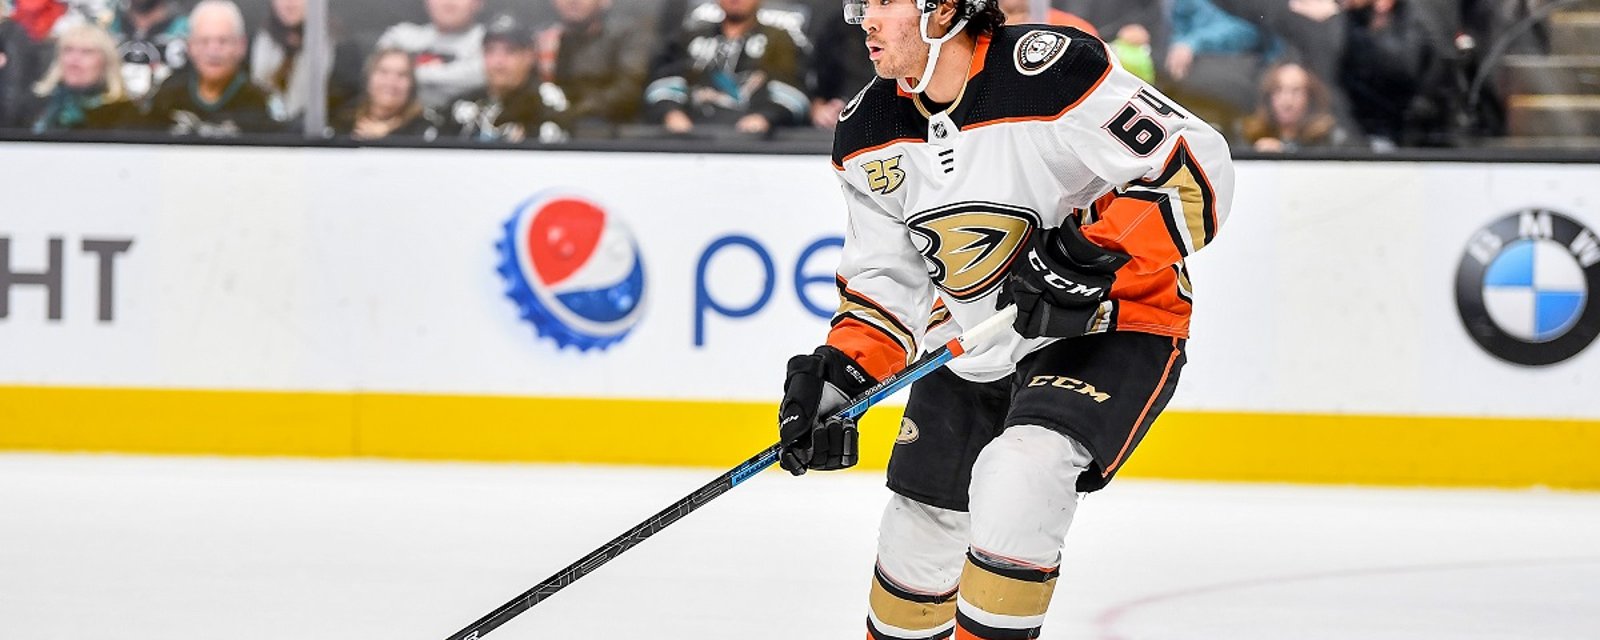 Ducks place forward on waivers in spite of coronavirus stoppage.